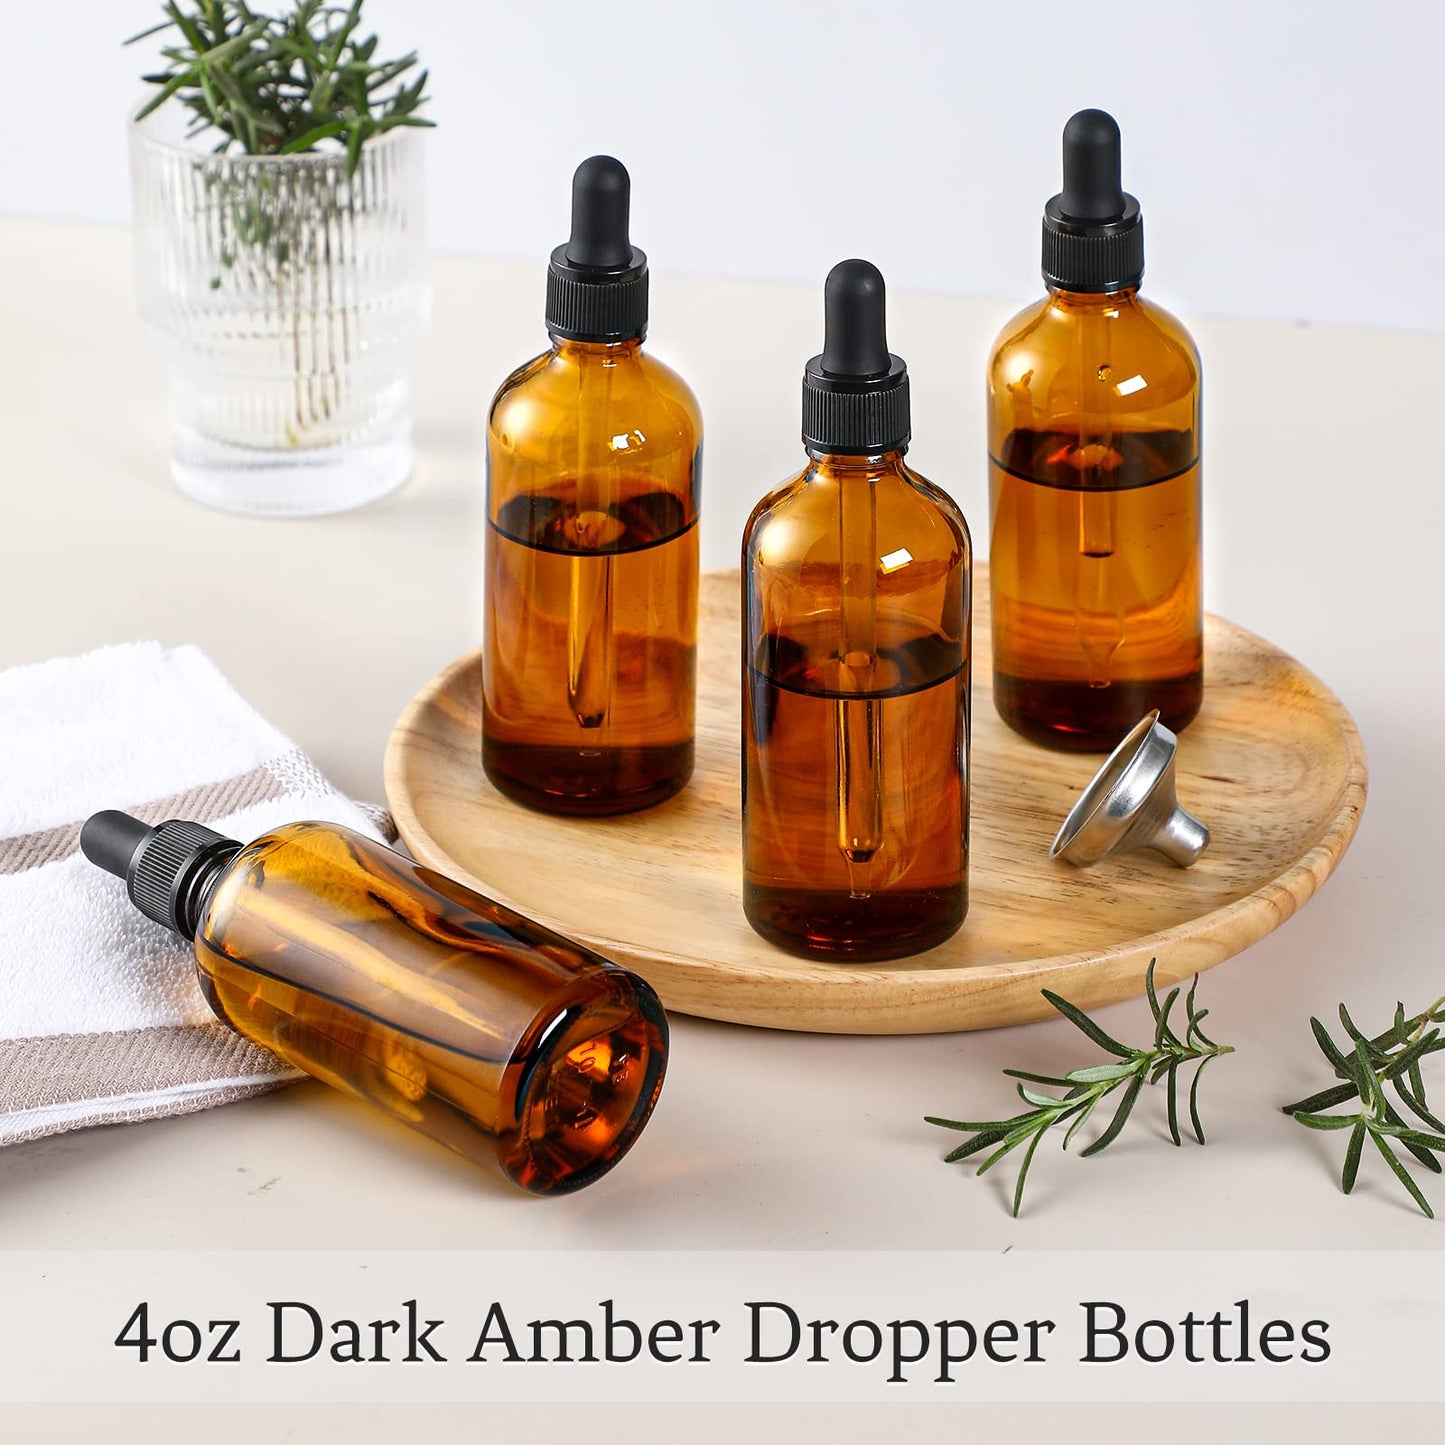 4 Pack, 4oz Glass Amber Dropper Bottles w/ 2 Extra 1mL Calibrated Glass Droppers & 1 Funnel & 4 Labels - 120ml Dark Brown Tincture Bottles w/ Eye Droppers - Leakproof Travel Bottles for Essential Oils